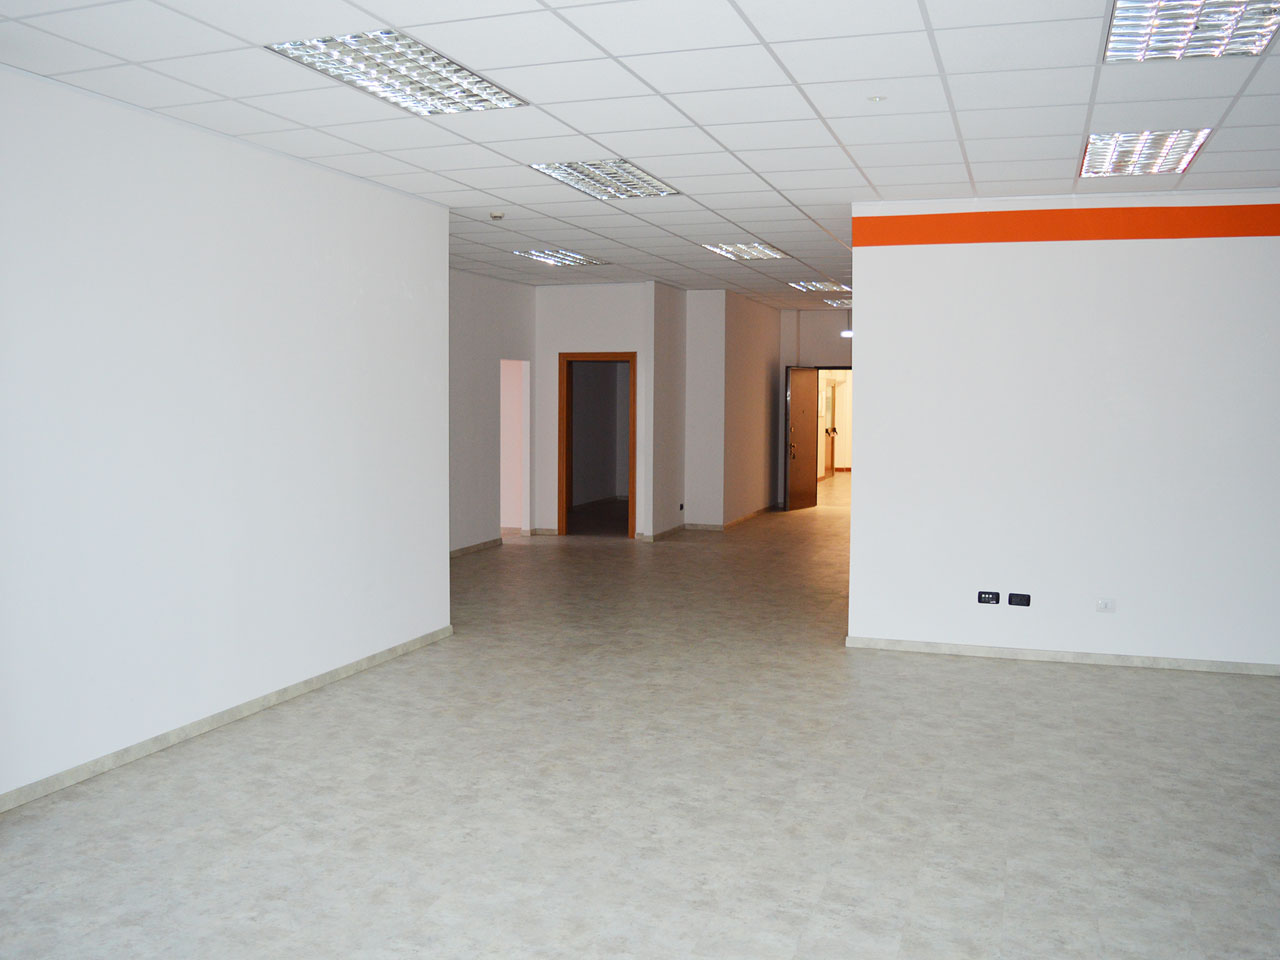 Office view from the first open space to the entrance